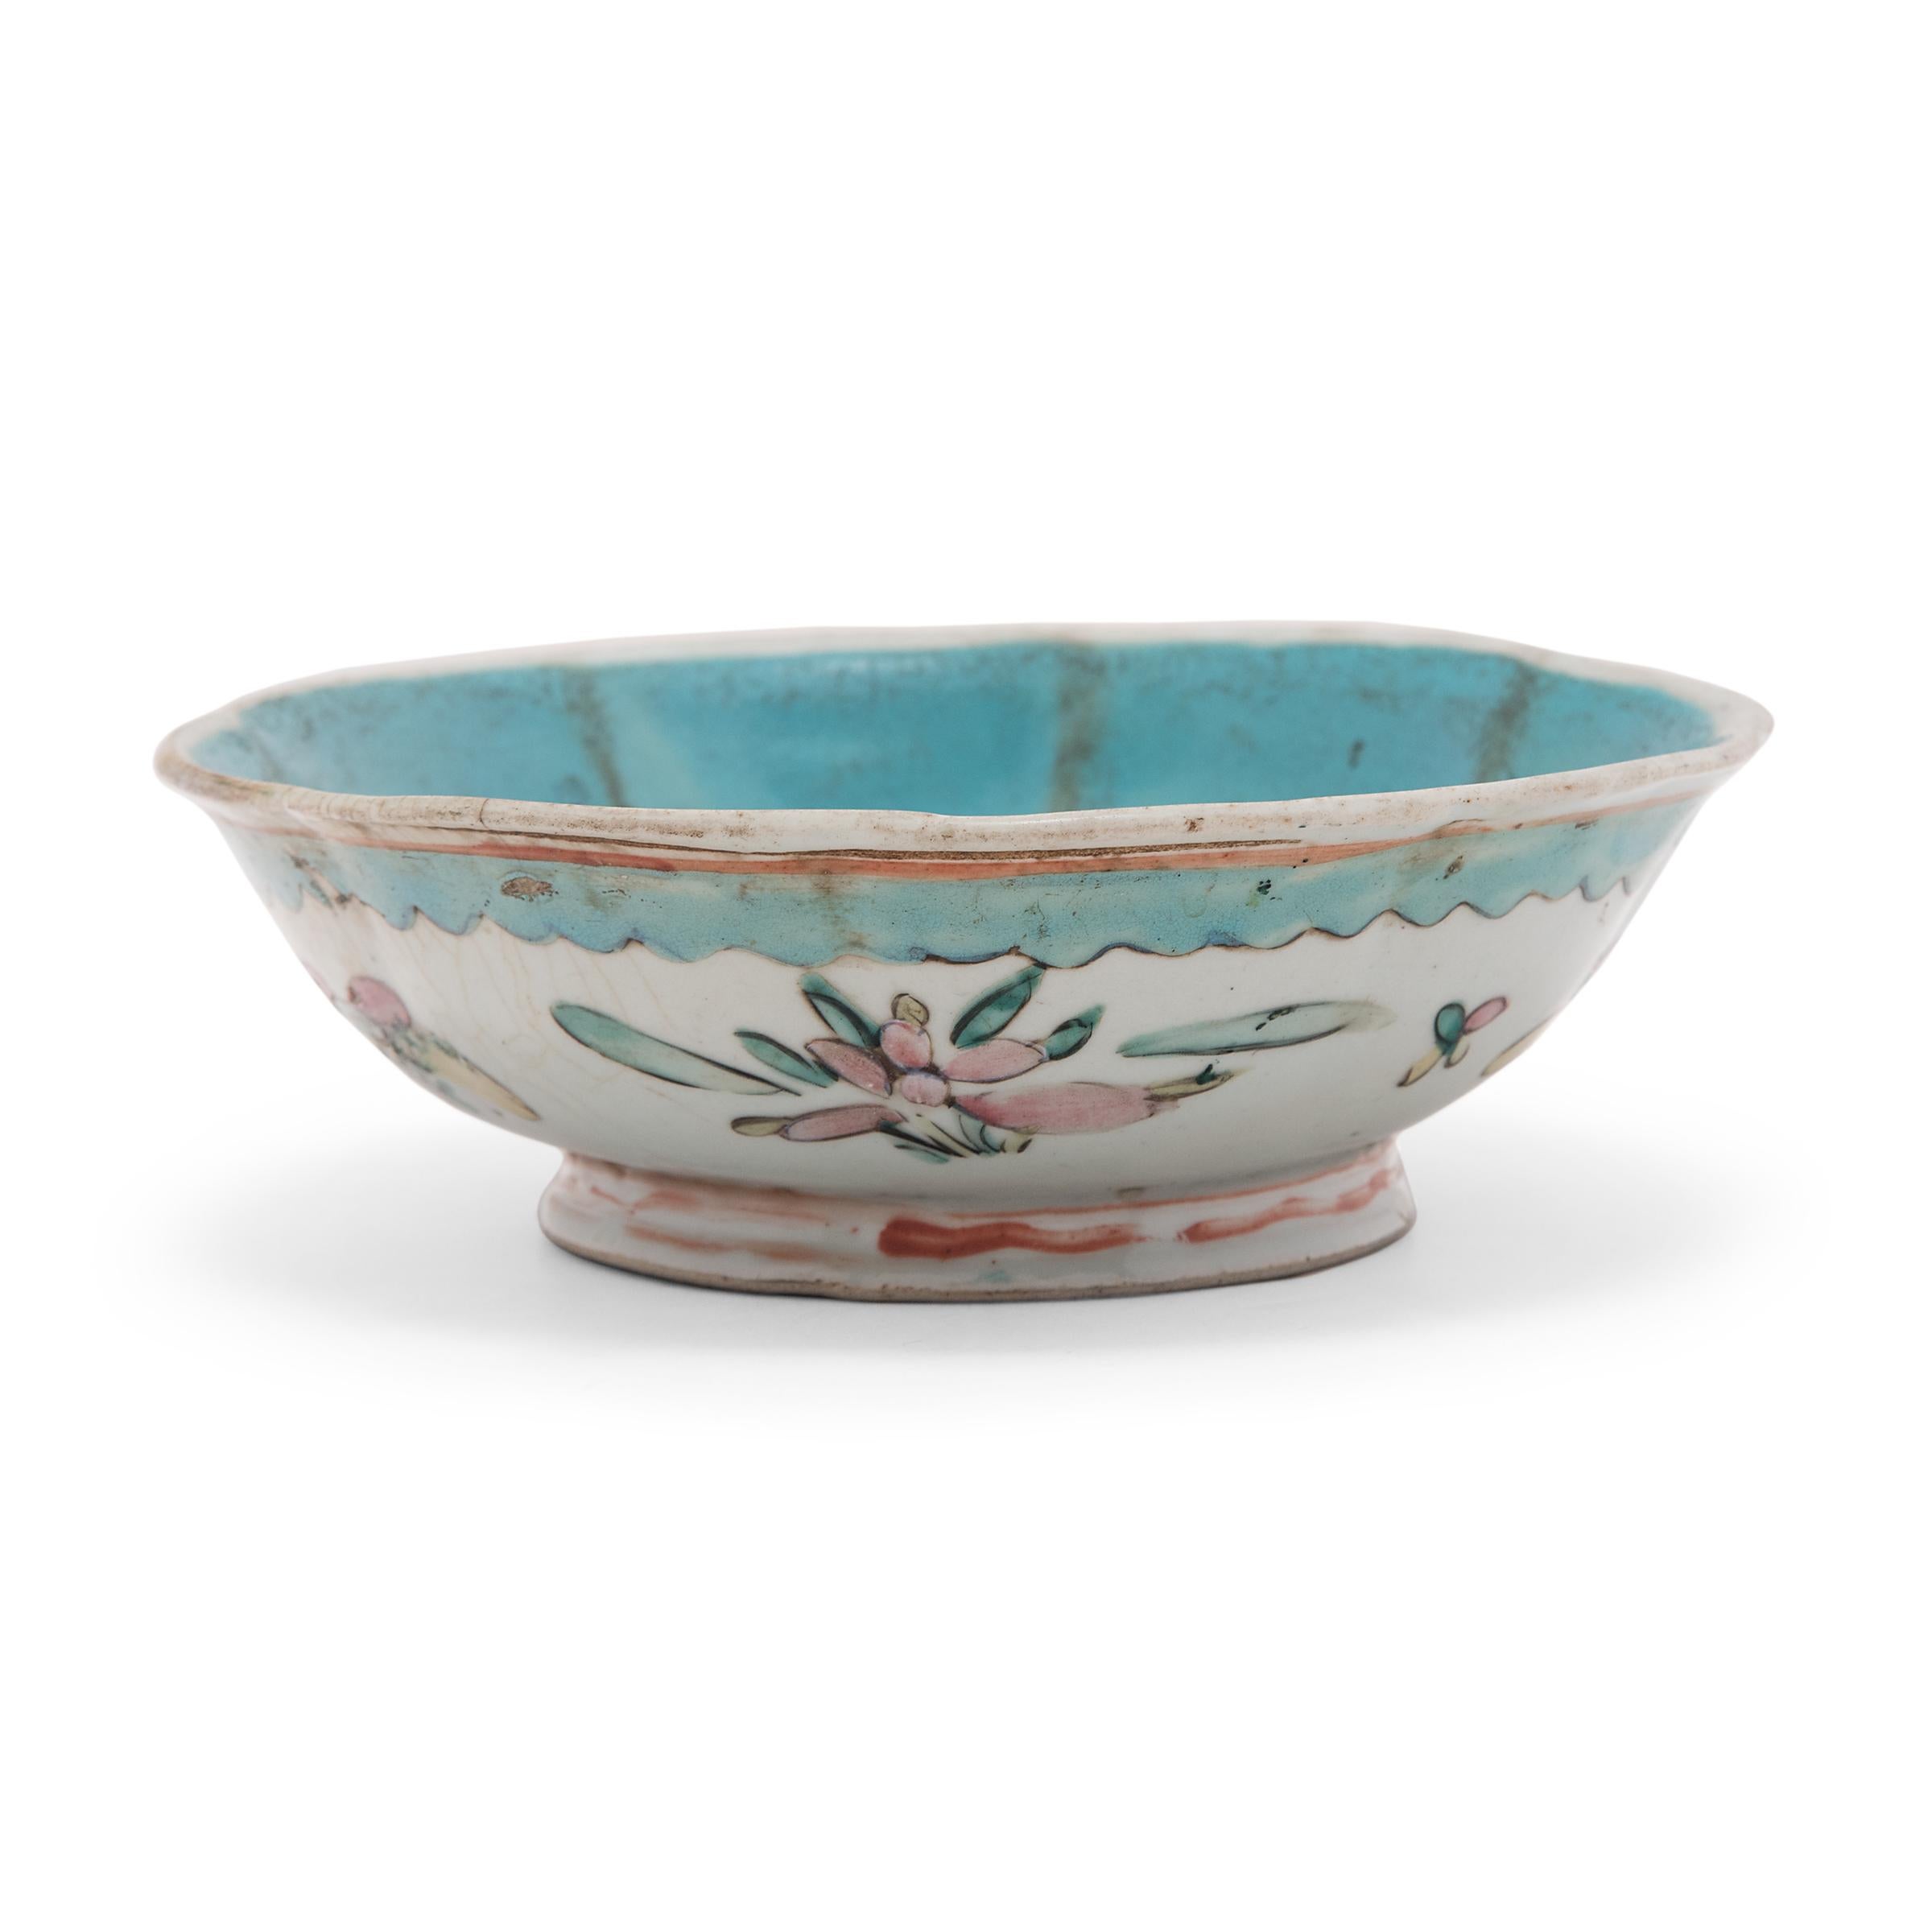 Qing Chinese Floral Offering Bowl, c. 1850